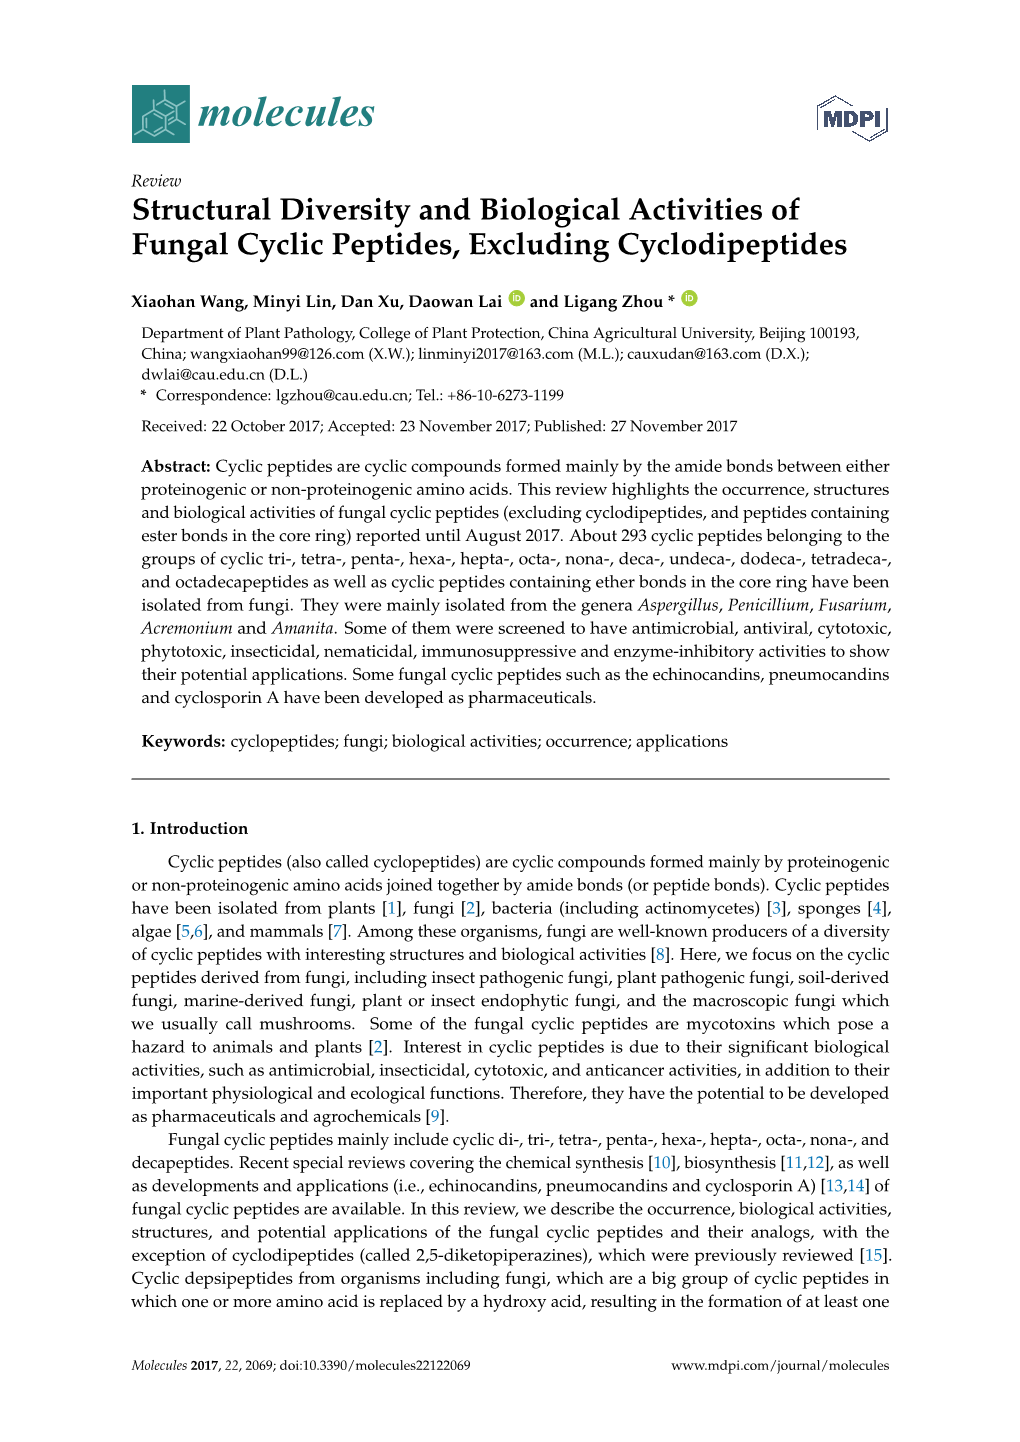 Structural Diversity and Biological Activities of Fungal Cyclic Peptides, Excluding Cyclodipeptides